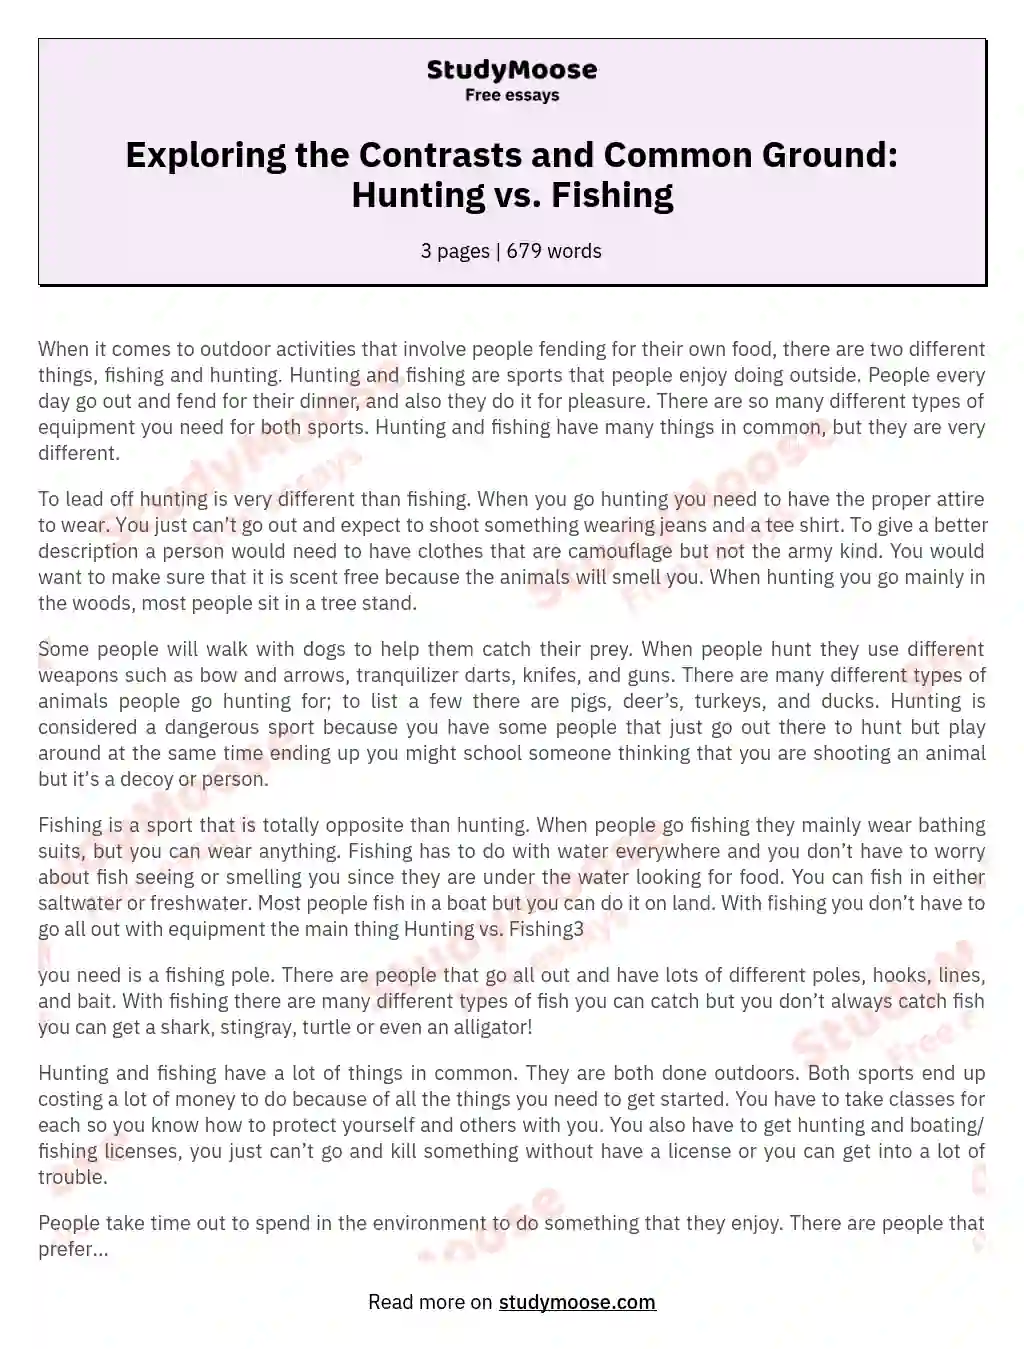 Exploring the Contrasts and Common Ground: Hunting vs. Fishing essay